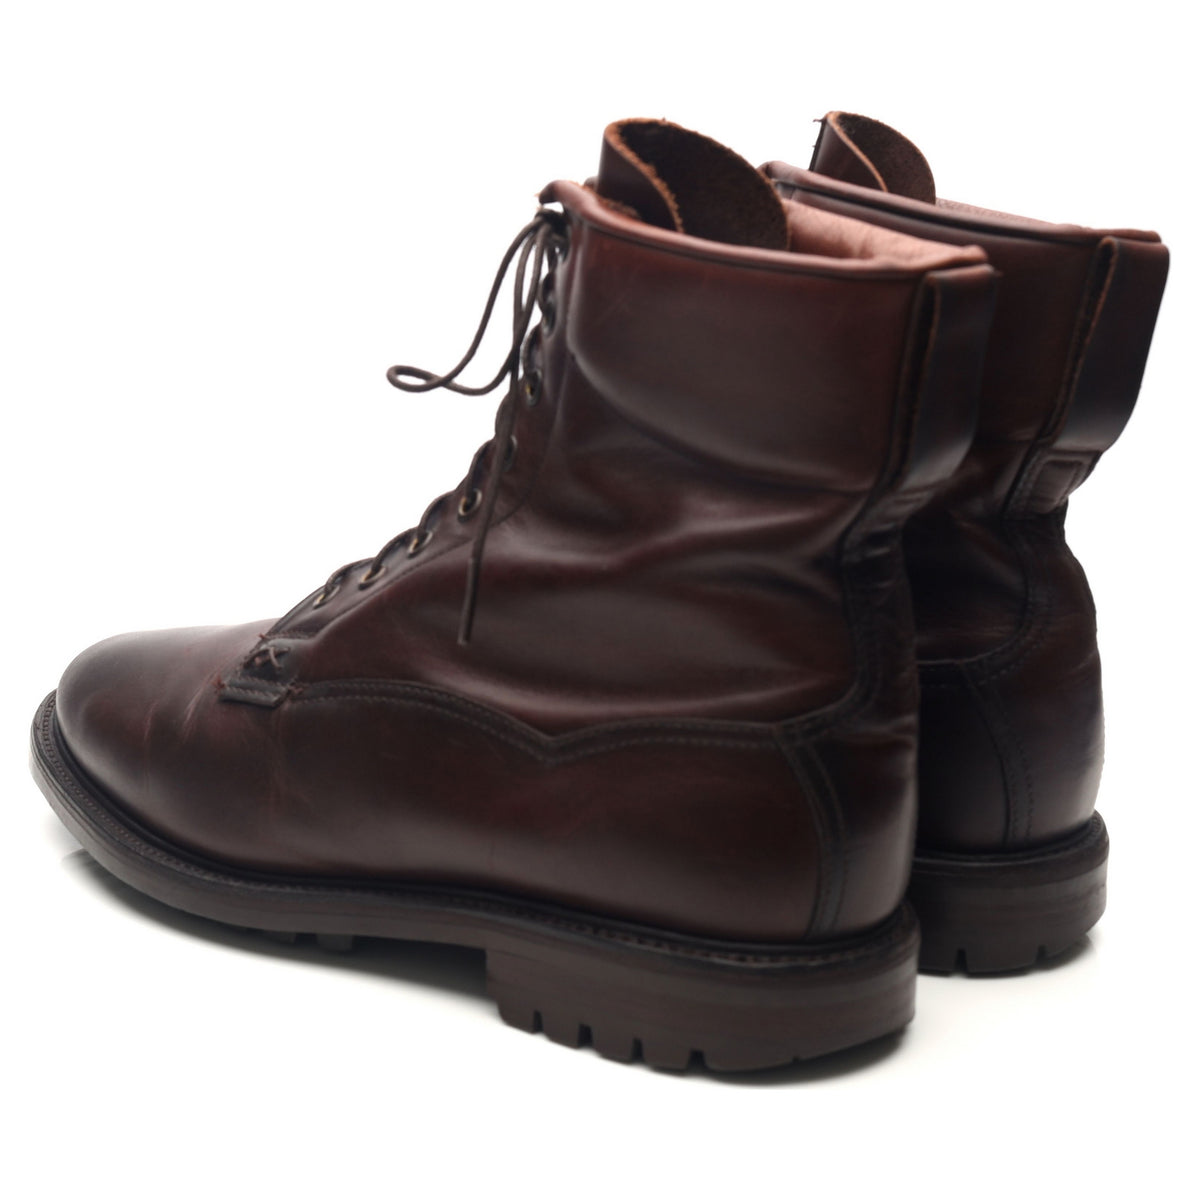 Dark Brown Leather Boots UK 9.5 F